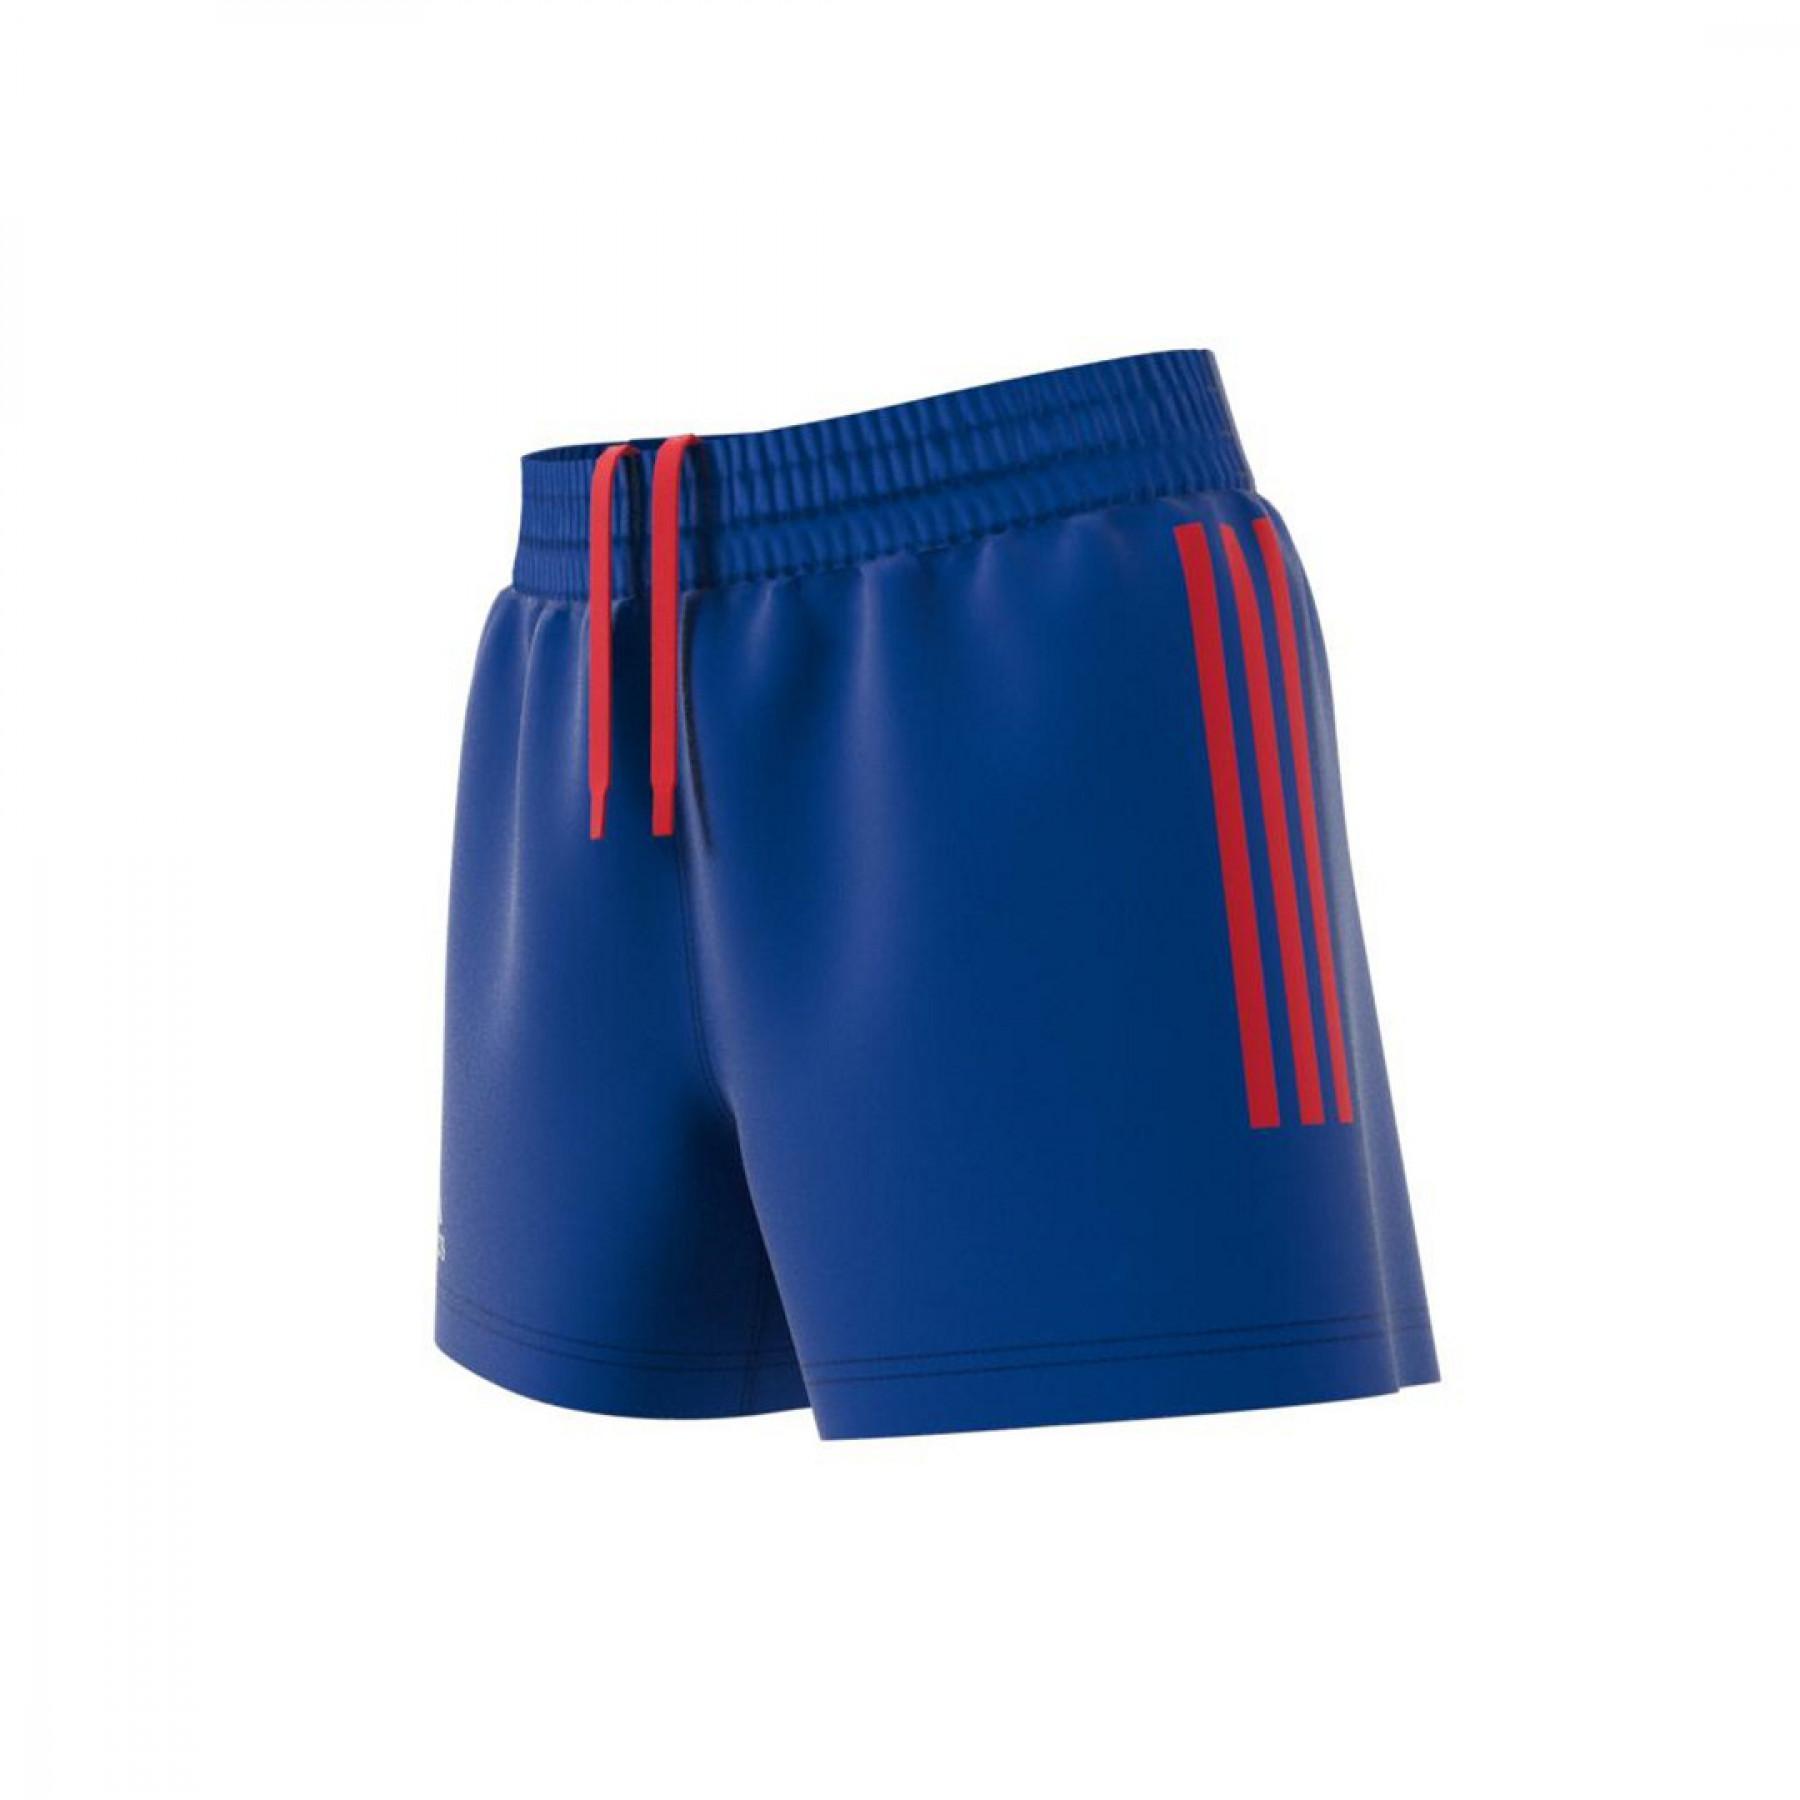 Women's team shorts from France 2021